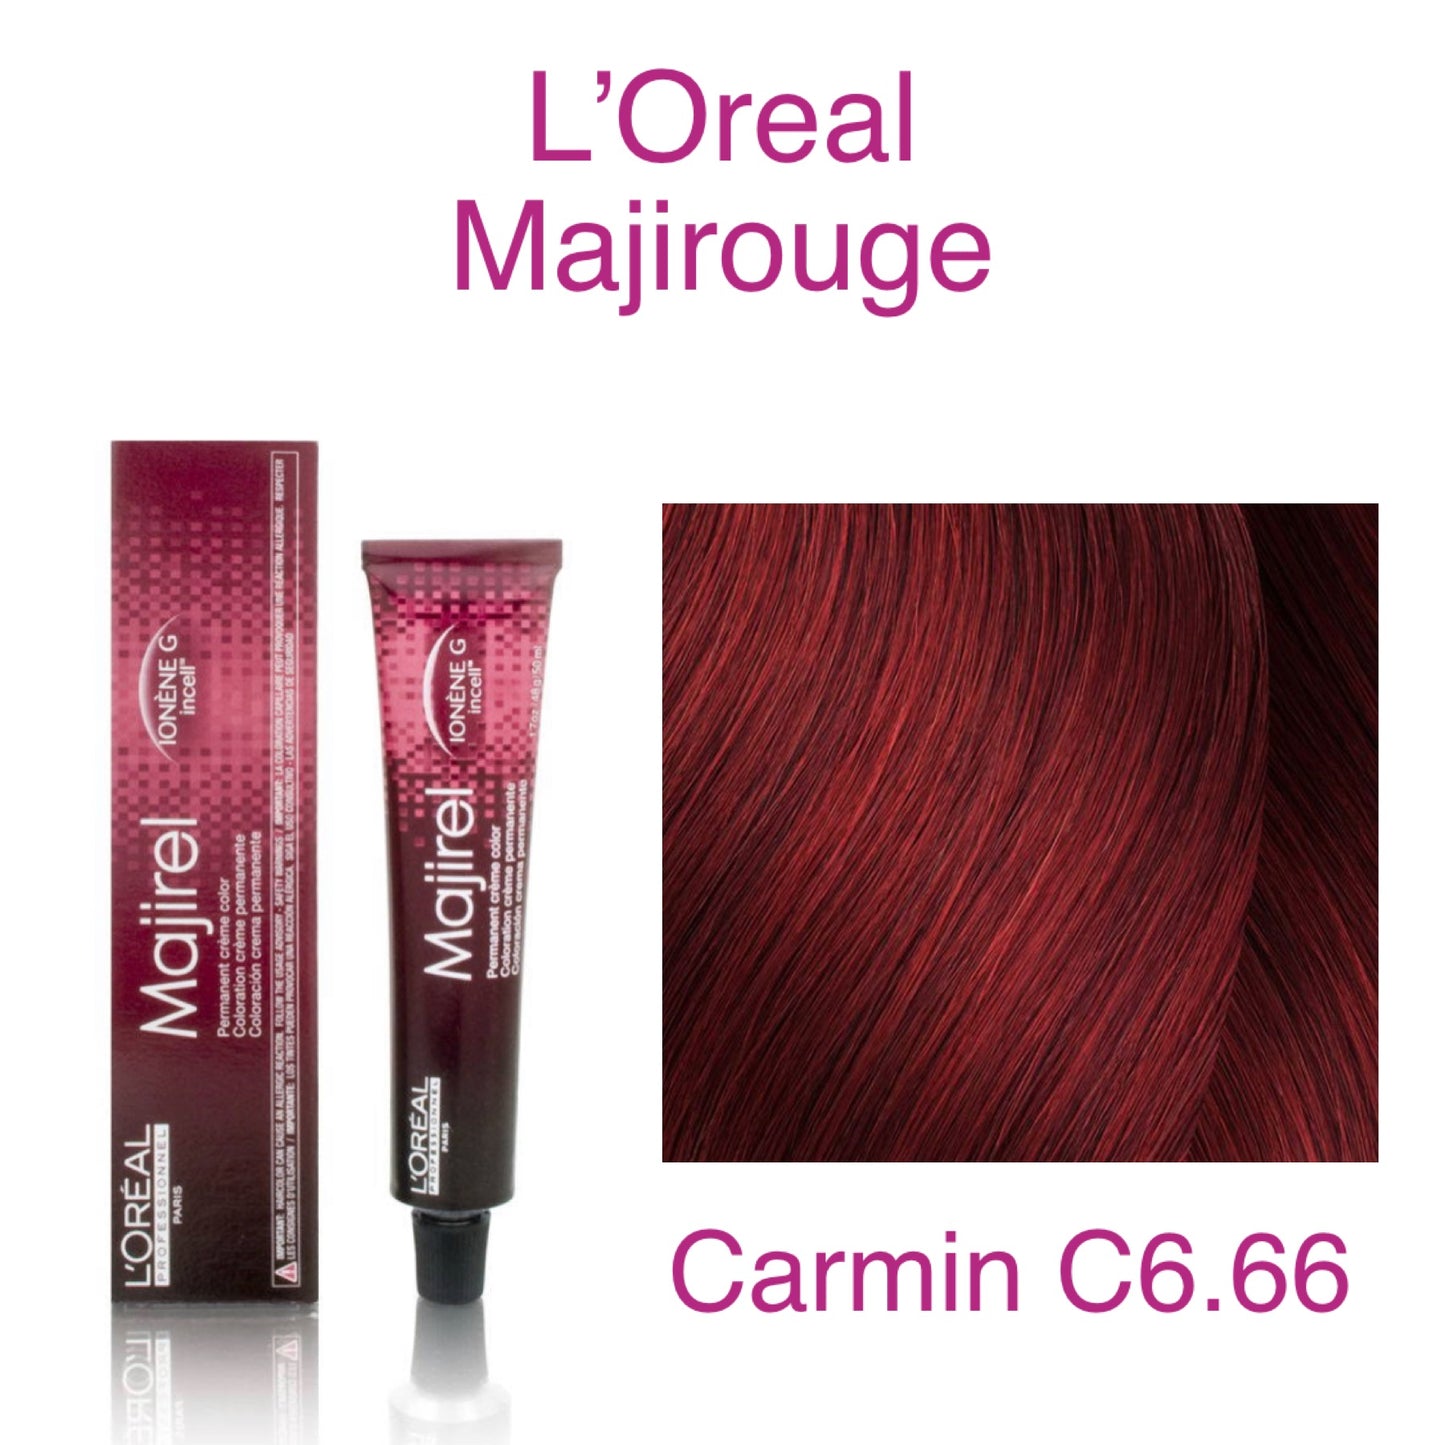 L’Oreal Majirouge Permanent Hair Colour 60ml